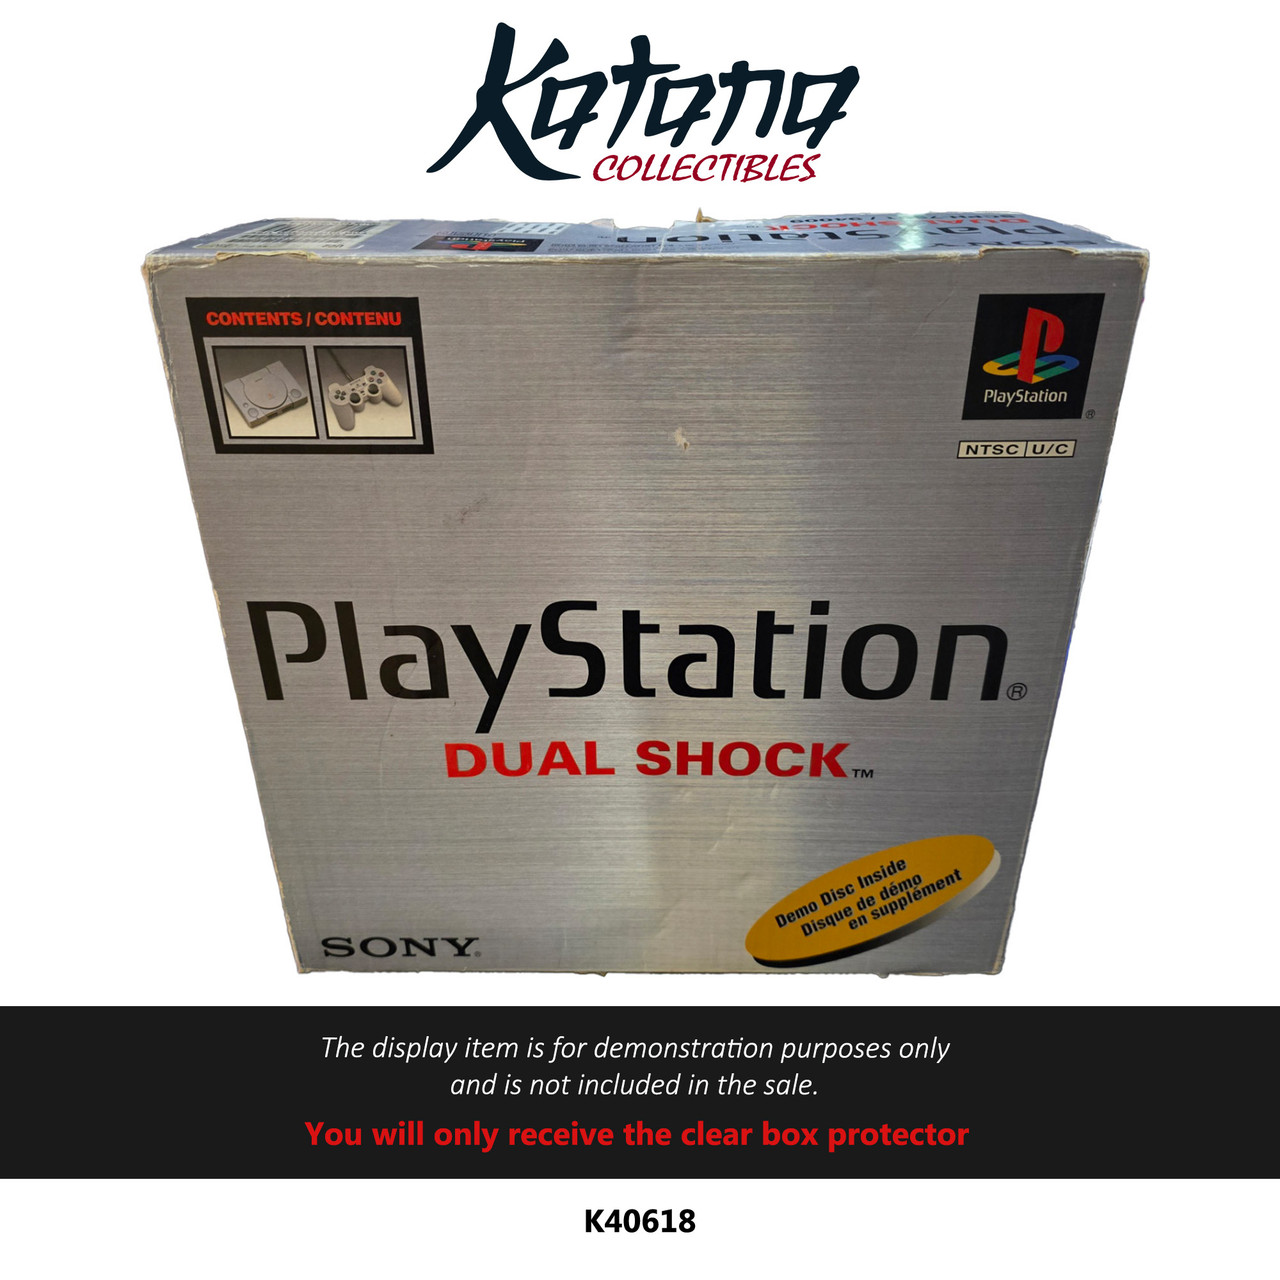 Katana Collectibles Protector For Sony Playstation 1 Dual Shock Console (Scph-9001) Ps1